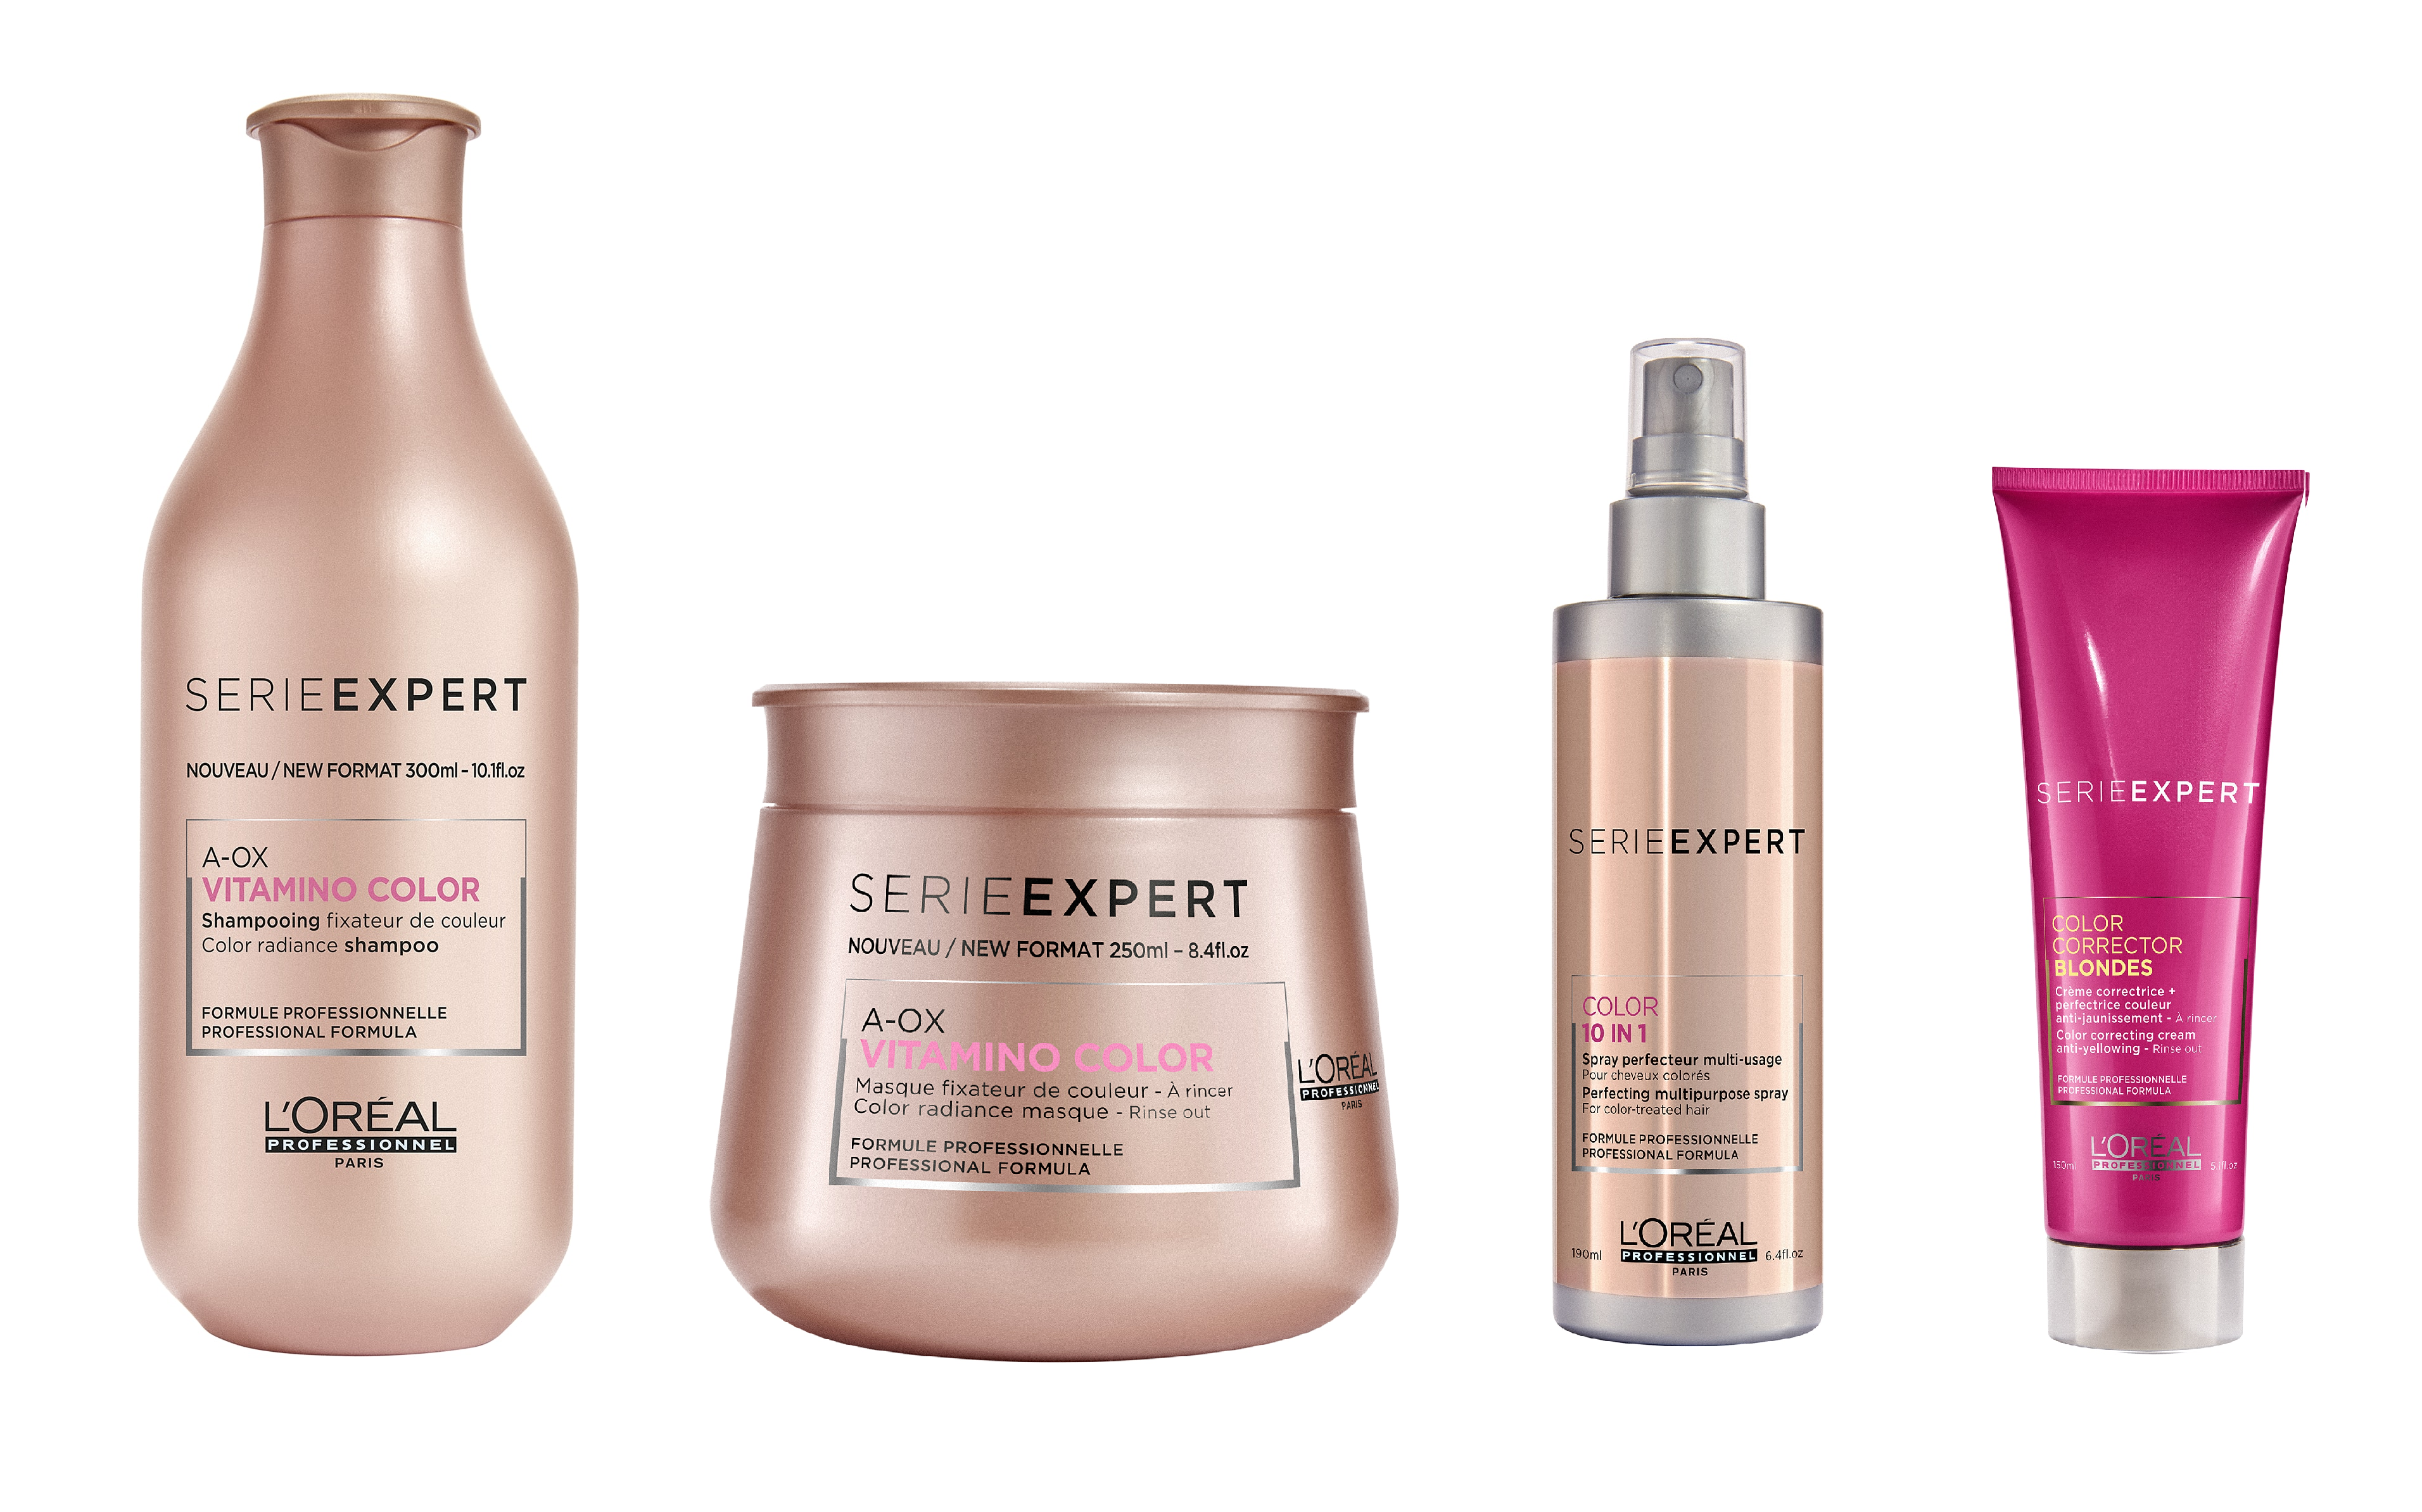 L’Oreal Serie Expert Vitamino Color A-OX Shampoo 300ml, Masque 250ml, Leave In Perfecting Spray 190ml and Blonde Cool Cover Cream 150ml